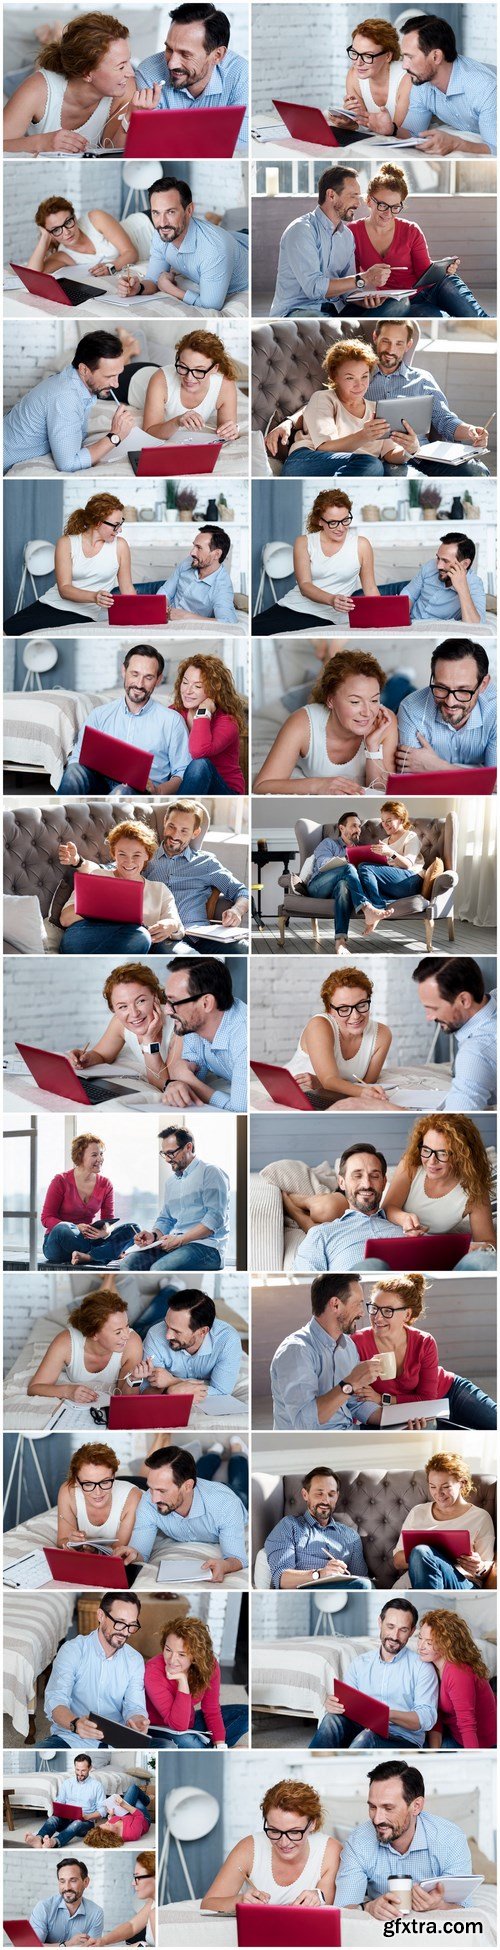 Woman and Man - Working with Laptop & Taking Notes 2 - 25xUHQ JPEG Photo Stock